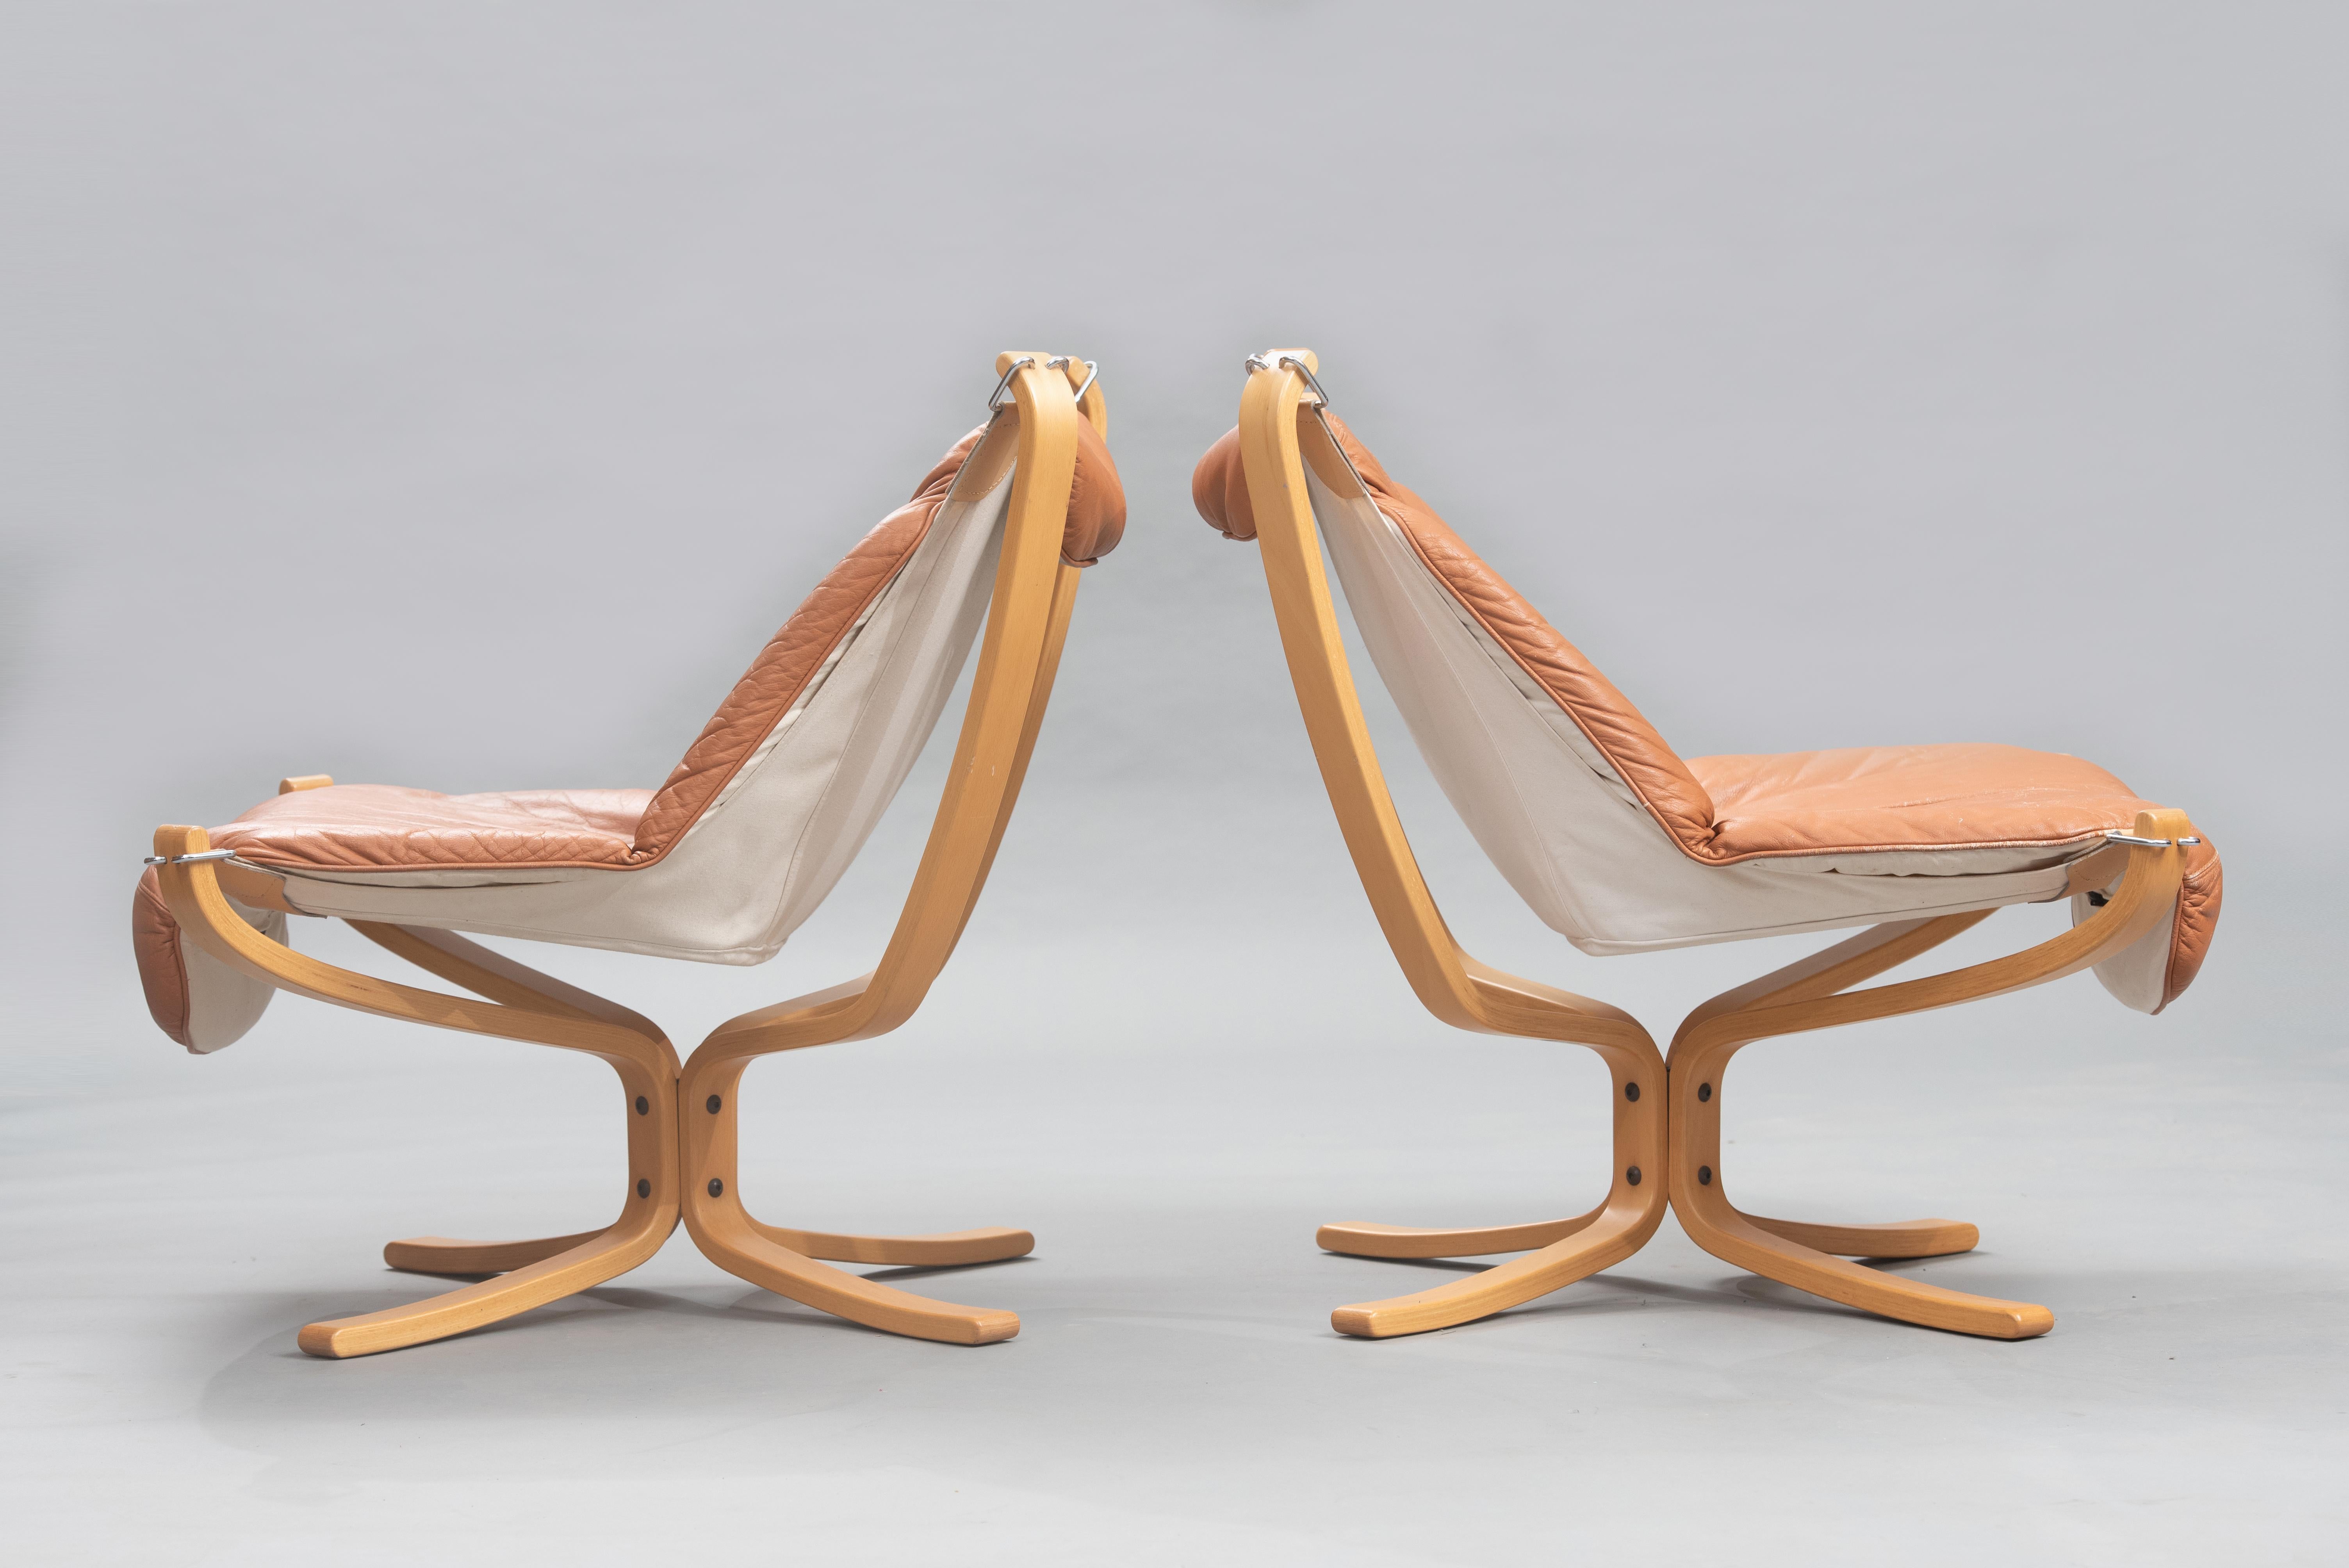 Varnished One Pair of Sigurd Ressel “Falcon” Leather Chairs for Vatne Møbler